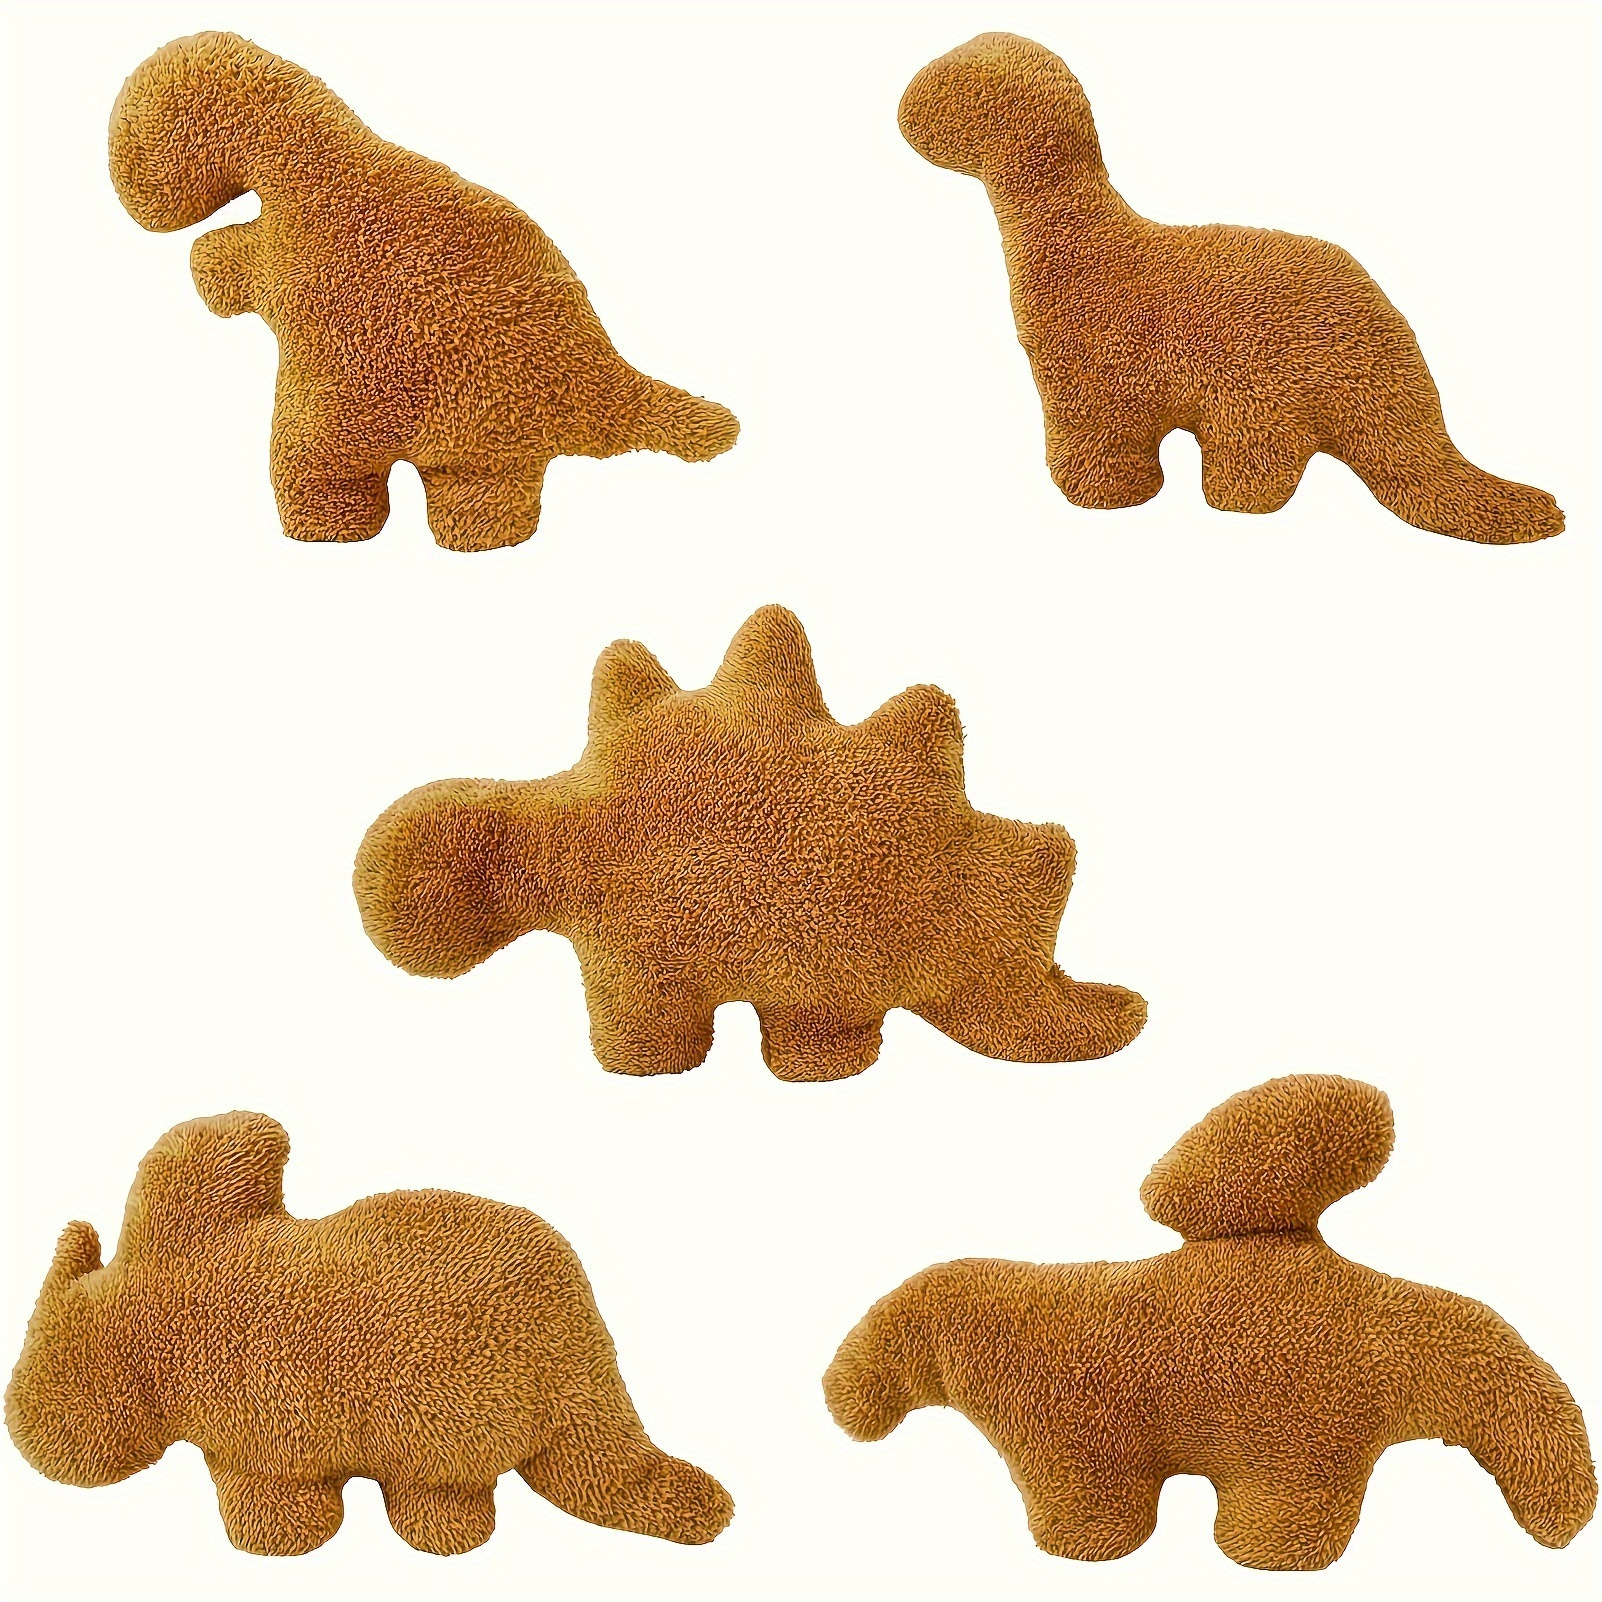 

5pcs Dinosaur Chicken Block Plush Doll Realistic Fun Dinosaur Fried Chicken Block Pillow Stuffed Toy Gift For Boys And Girls Christmas Gift